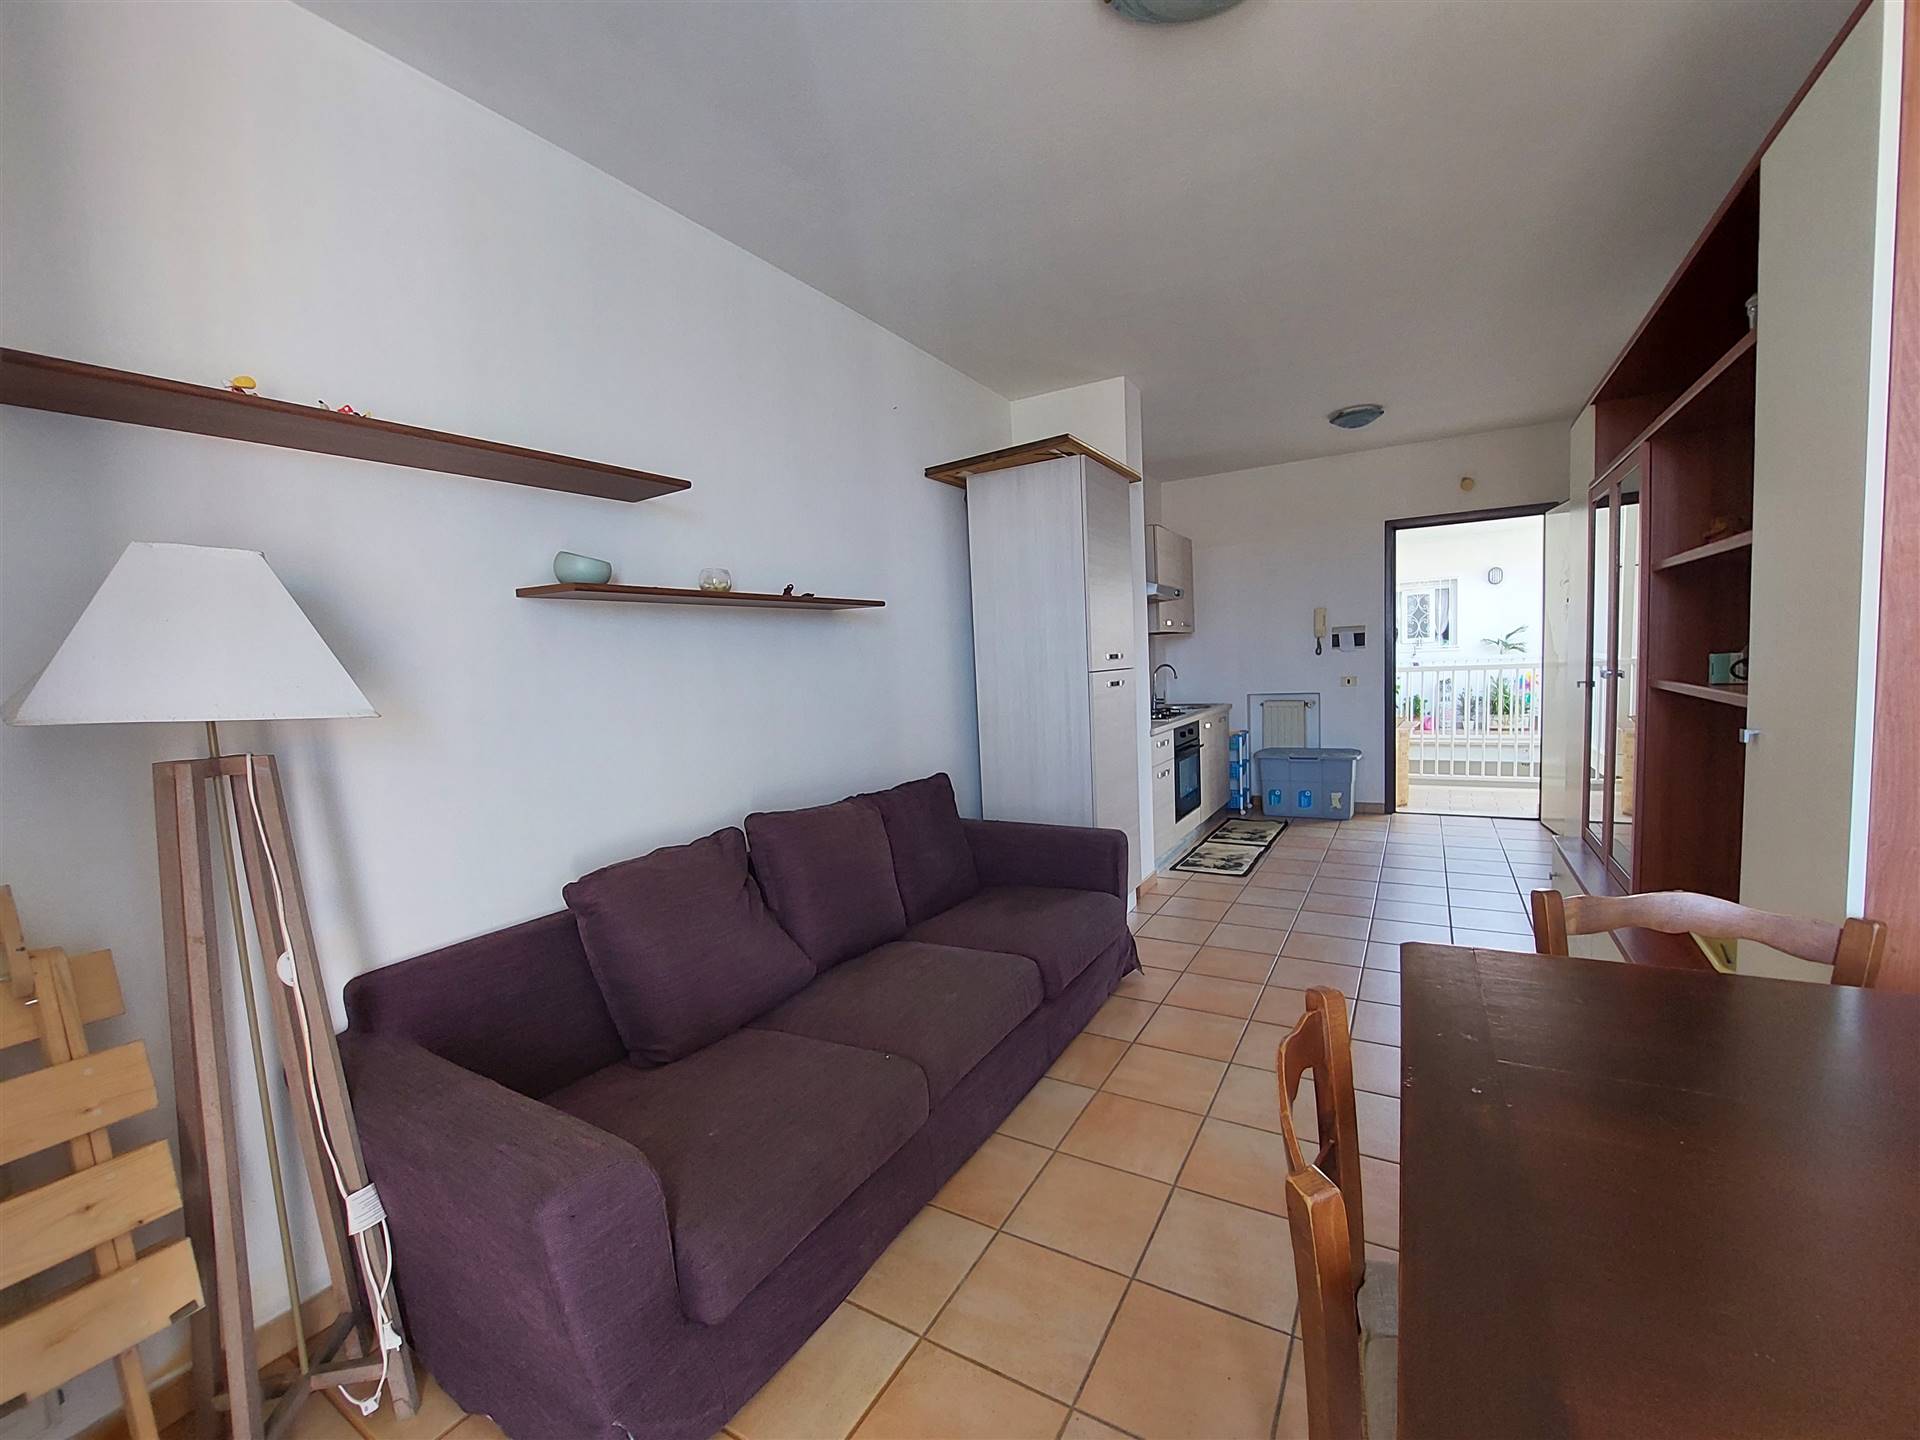 SANTA MARINELLA, Apartment for sale of 50 Sq. mt., Good condition, Energetic class: G, Epi: 175 kwh/m2 year, placed at 2°, composed by: 2 Rooms, Show cooking, , 1 Bedroom, 1 Bathroom, Elevator, 